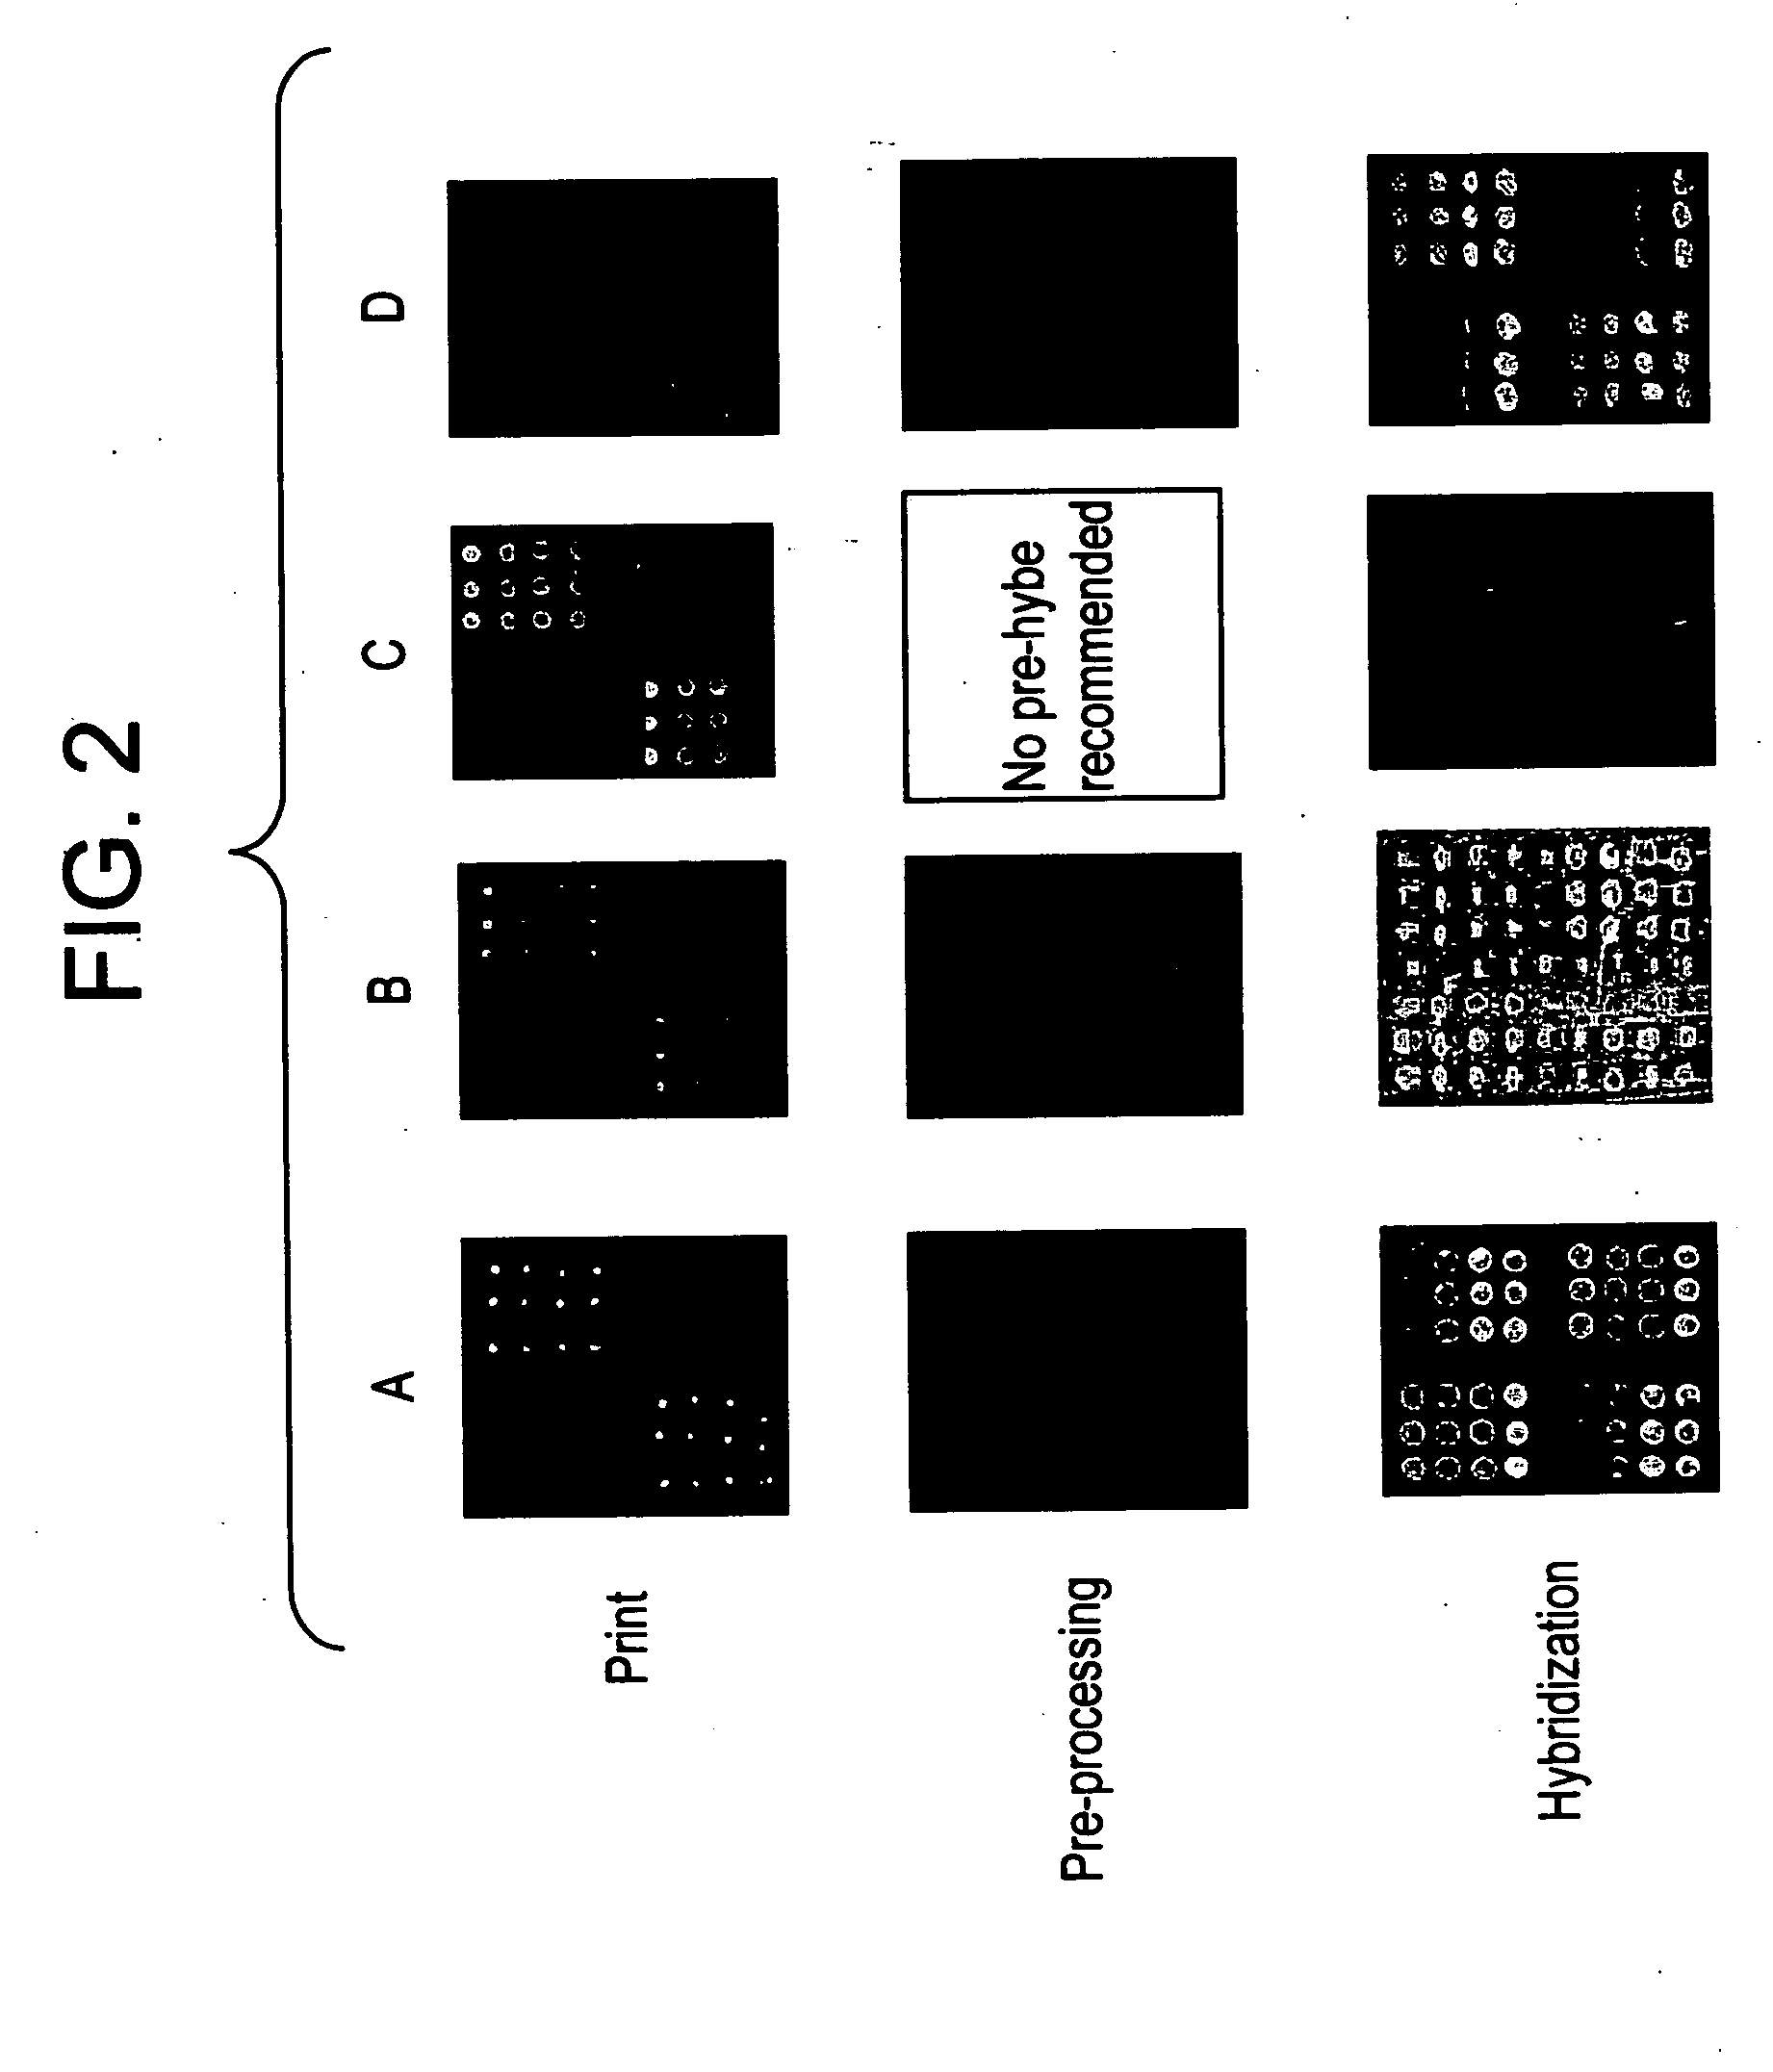 Reagent systems for biological assays